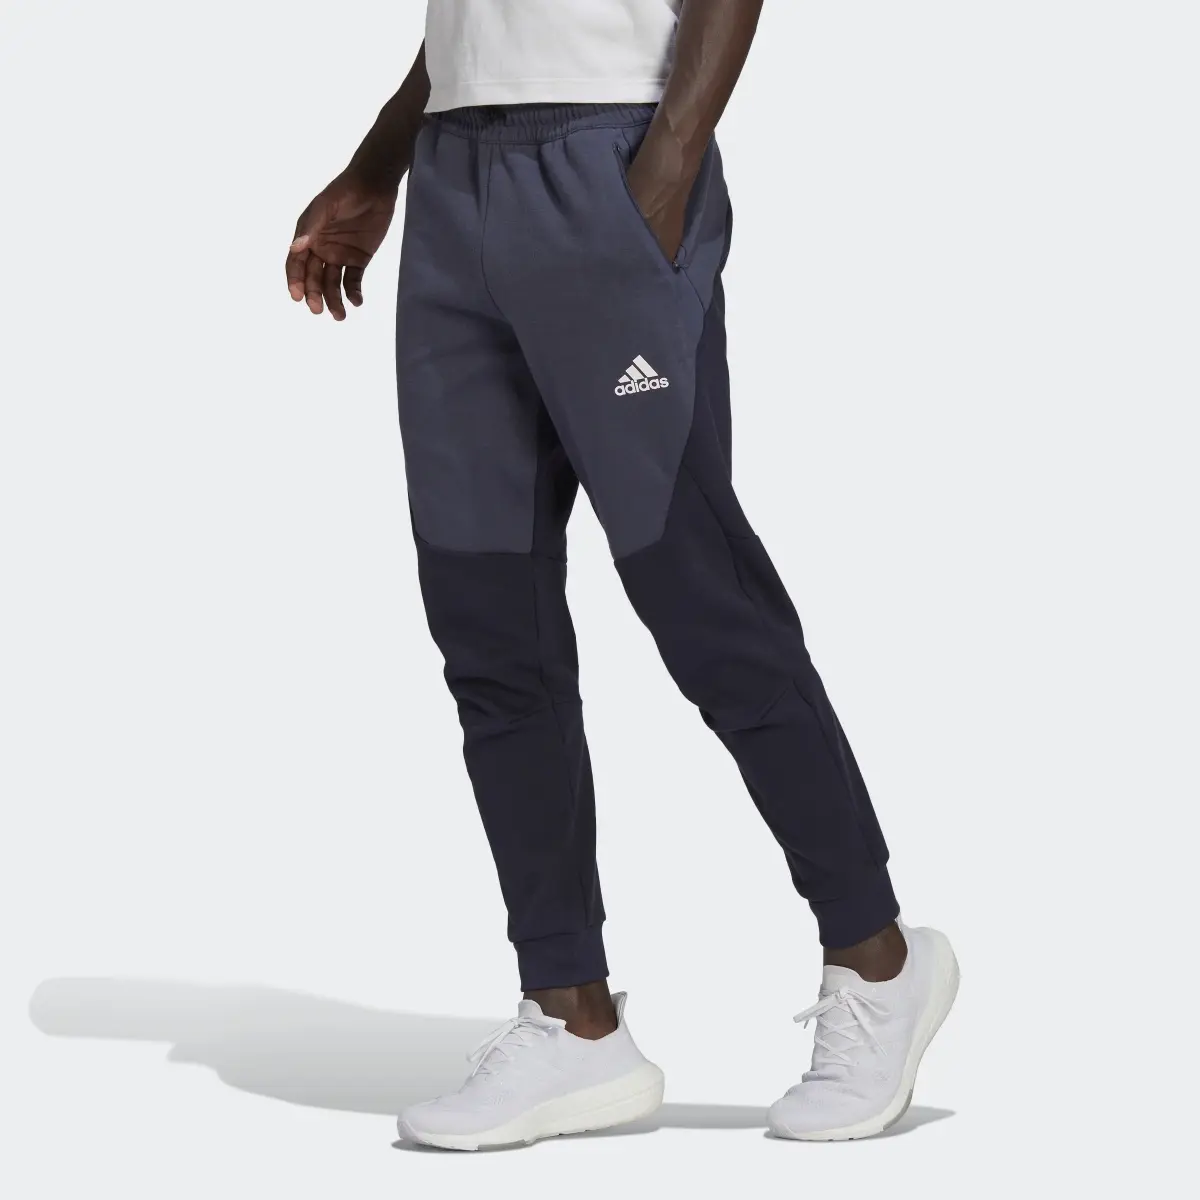 Adidas Designed for Gameday Joggers. 1